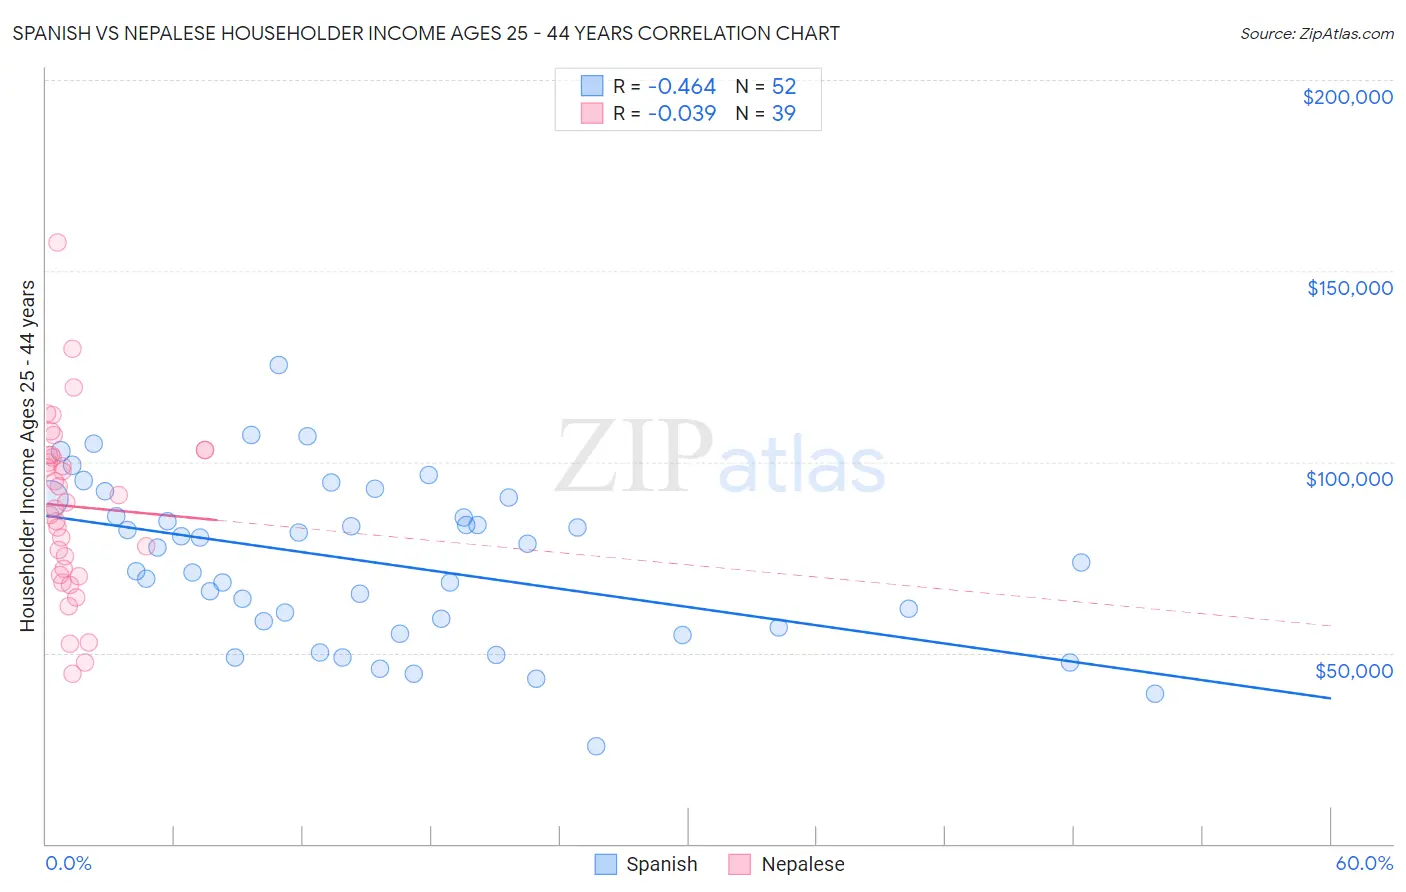 Spanish vs Nepalese Householder Income Ages 25 - 44 years